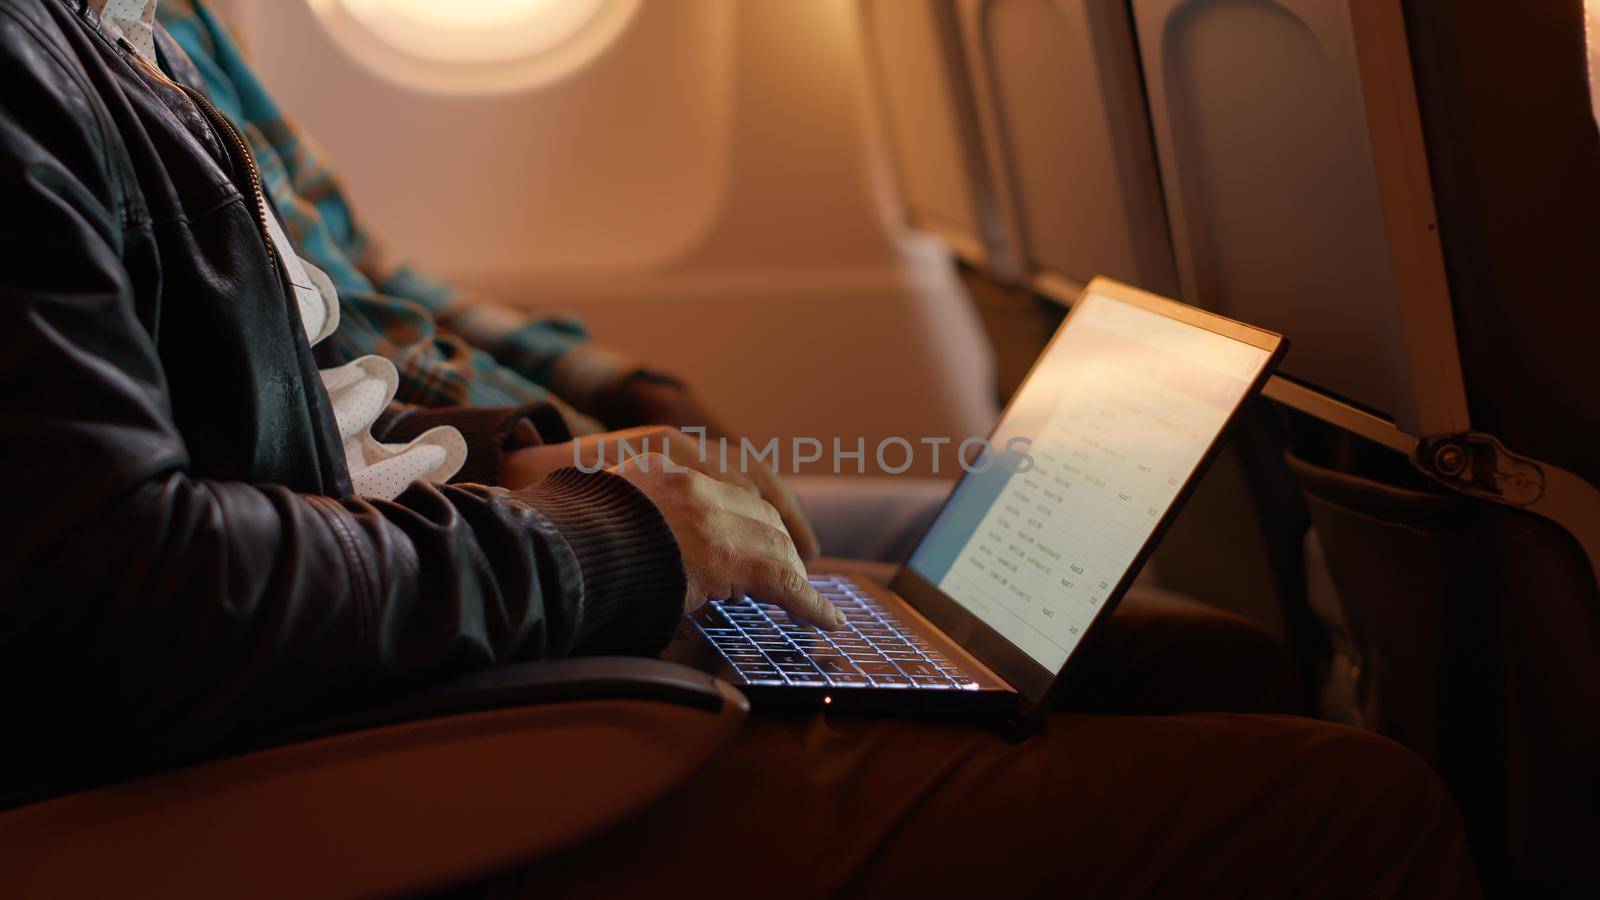 Tired employee travelling by airplane and working on laptop, using computer on flight during sunset. Work trip on plane, flying on vacation in economy class with people.